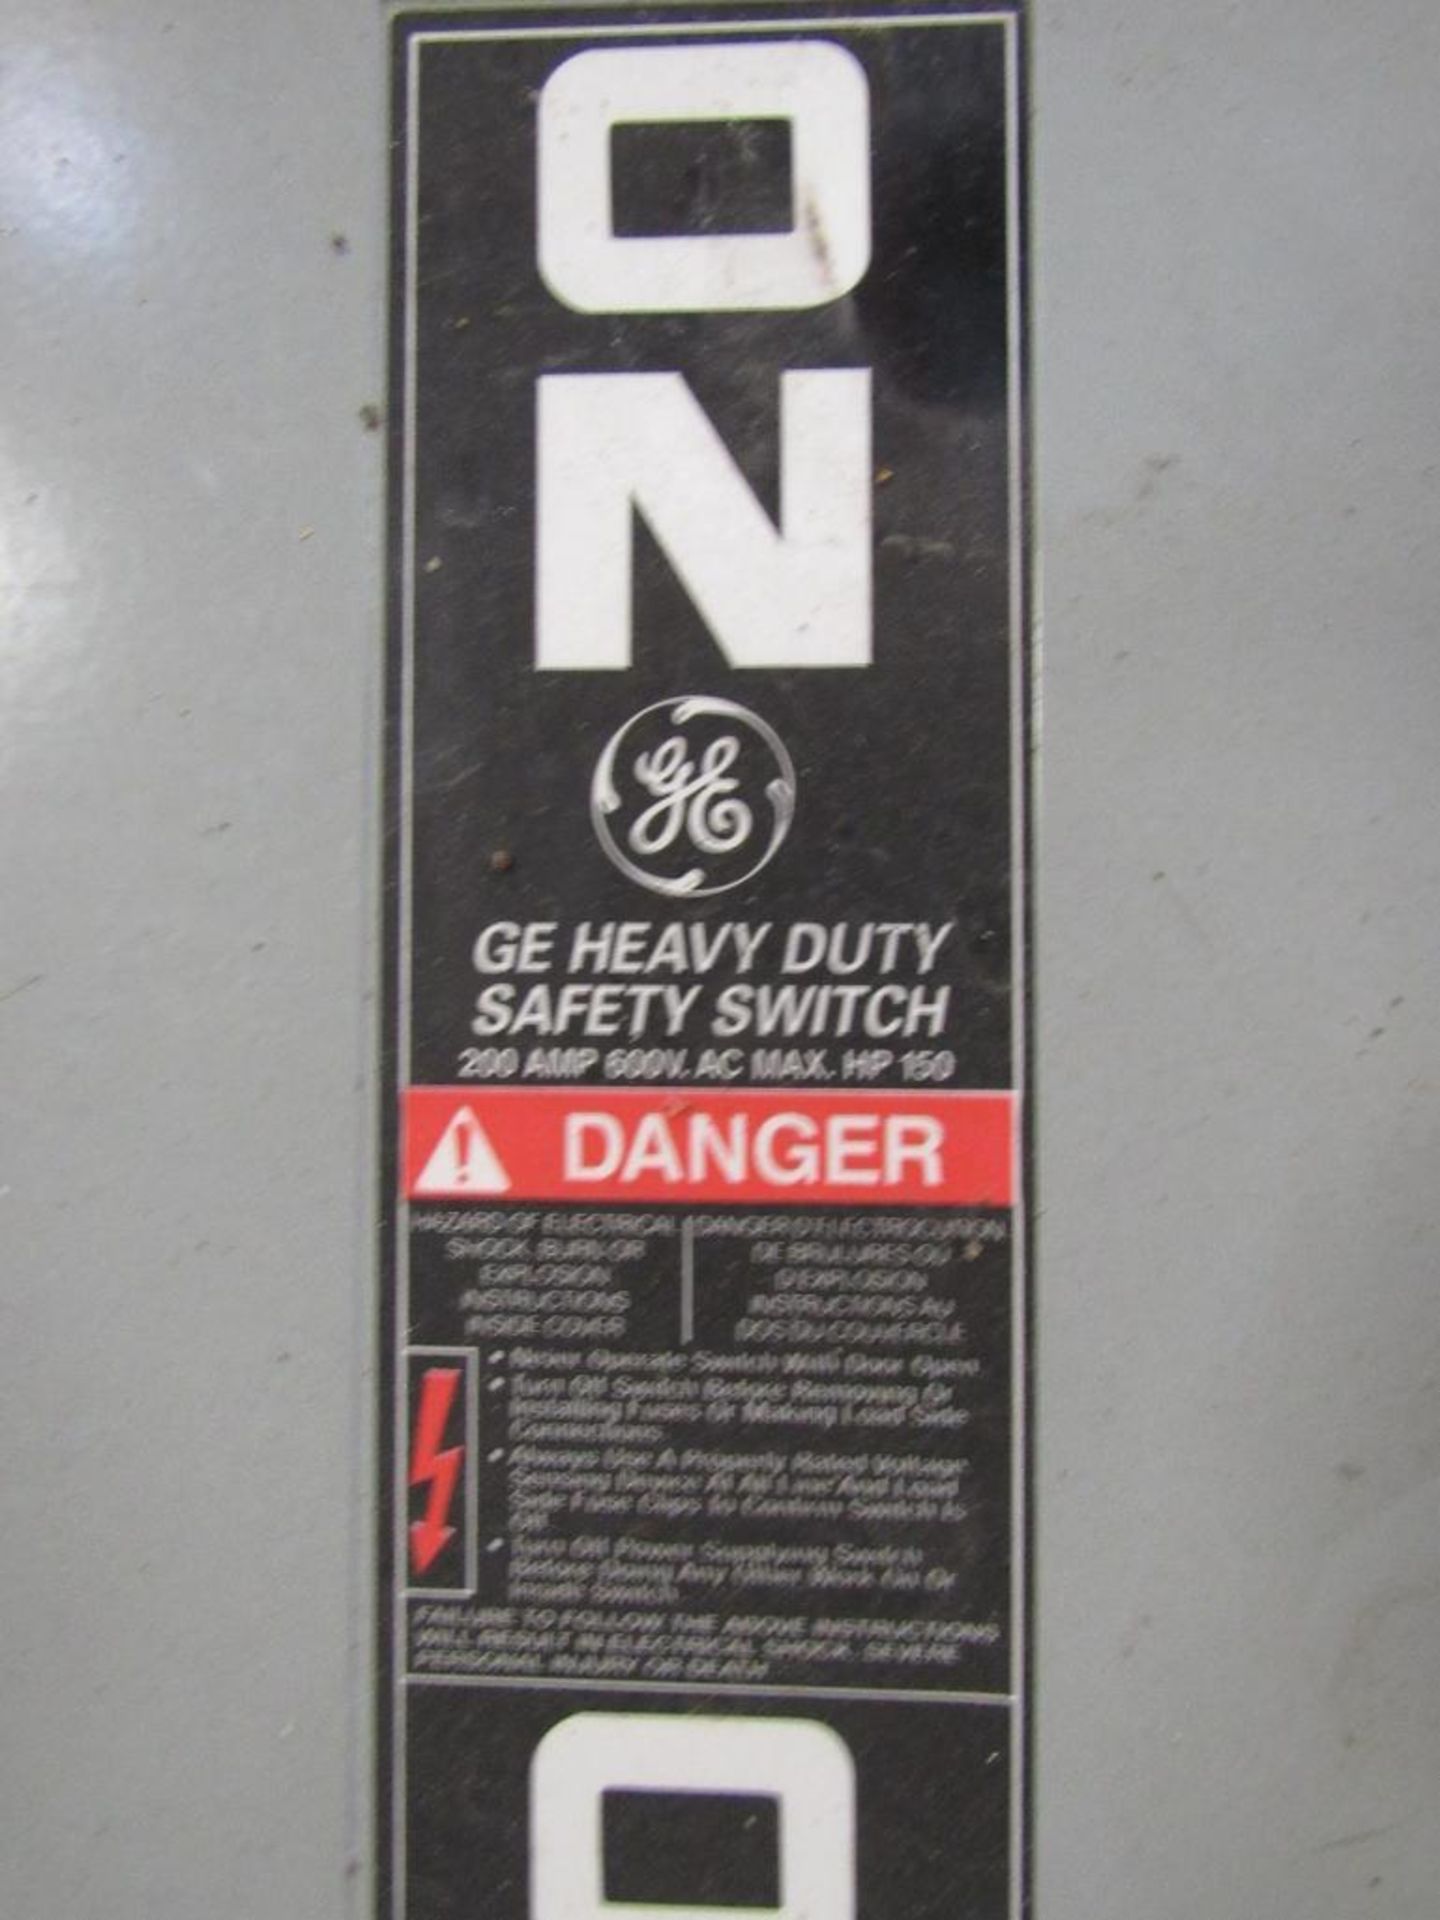 GE Heavy Duty Safety Switch - Image 3 of 3